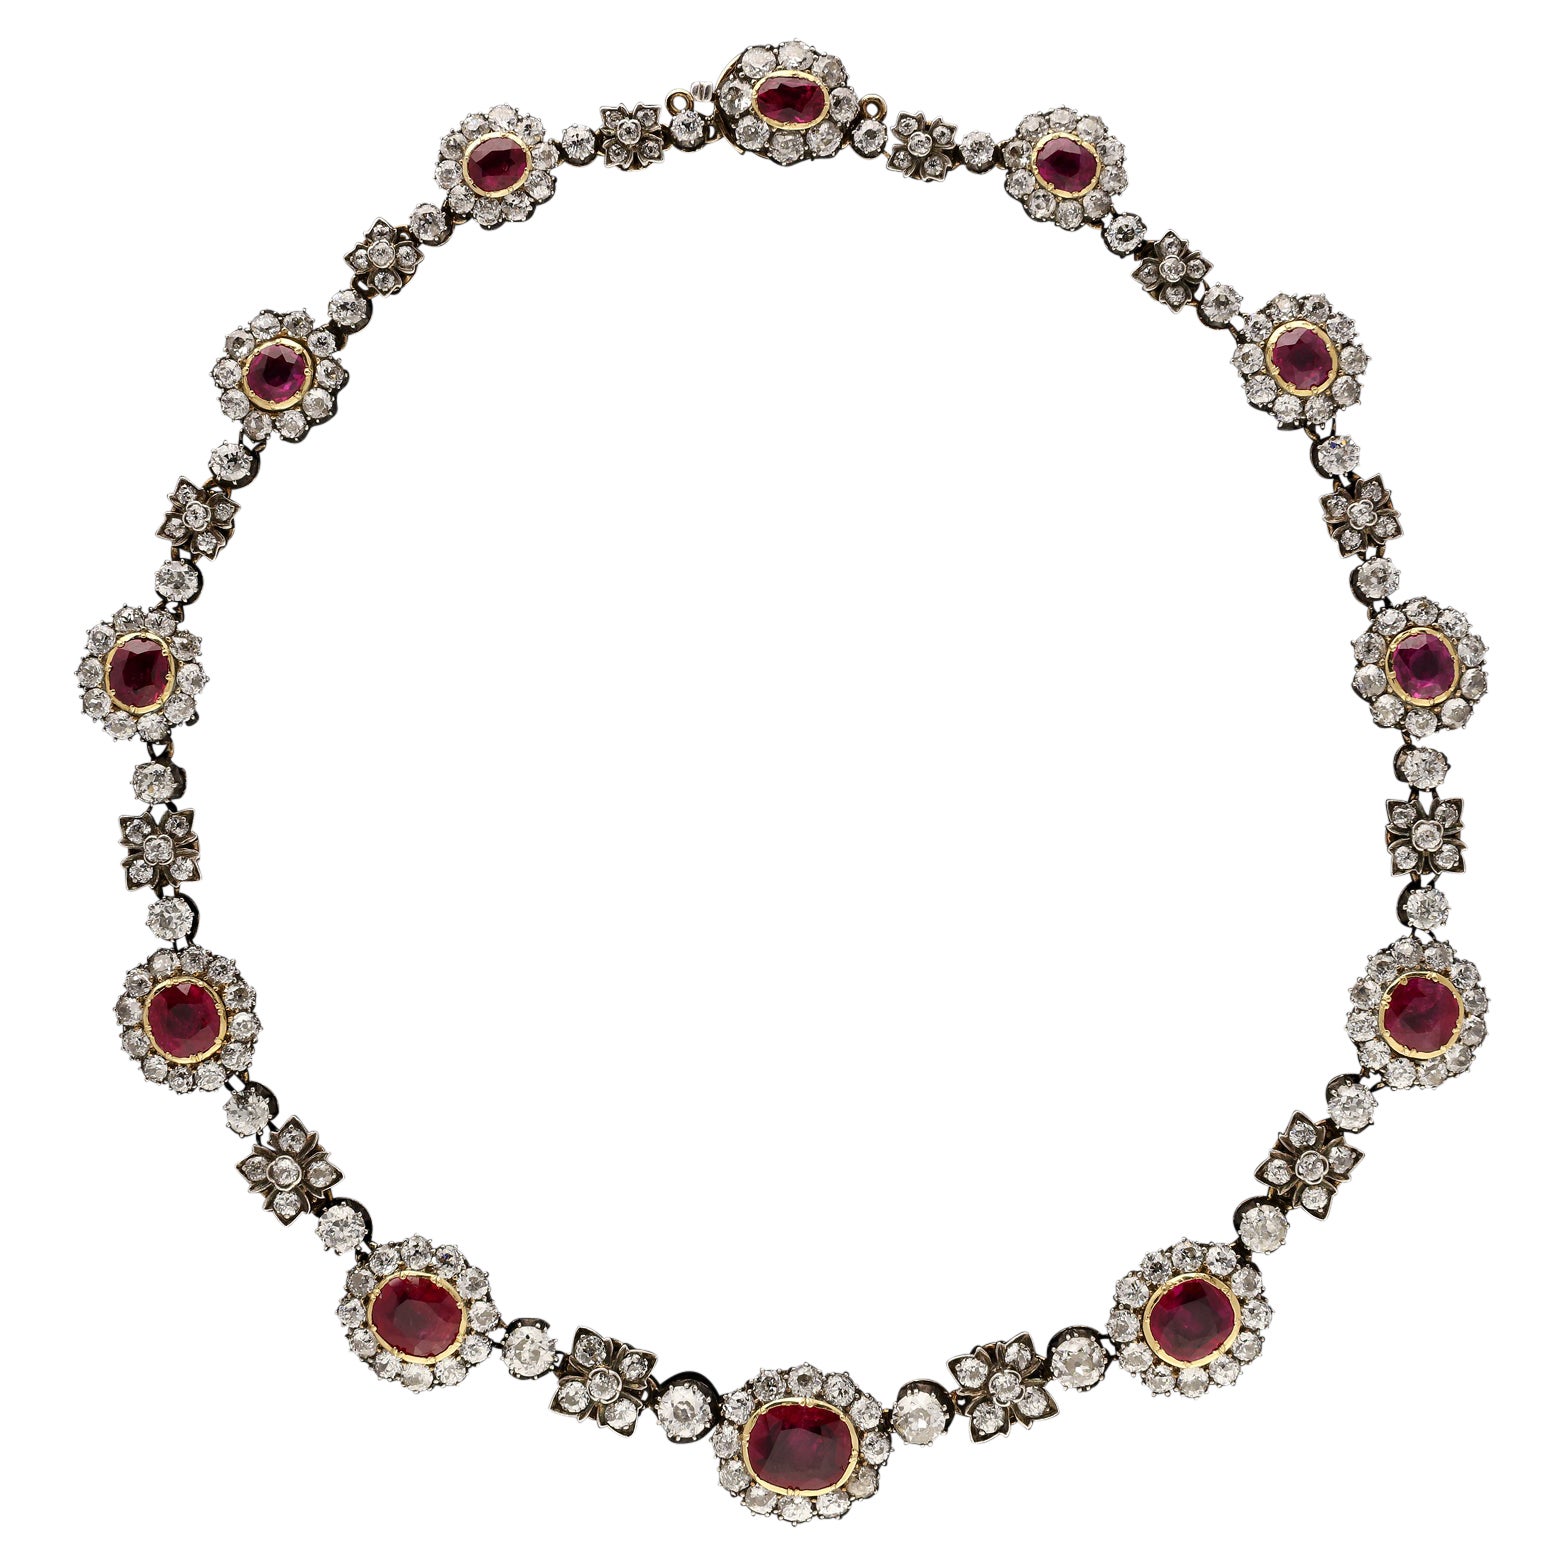 French Antique Stunning Burmese Ruby and Diamond Cluster Necklace, Circa 1870